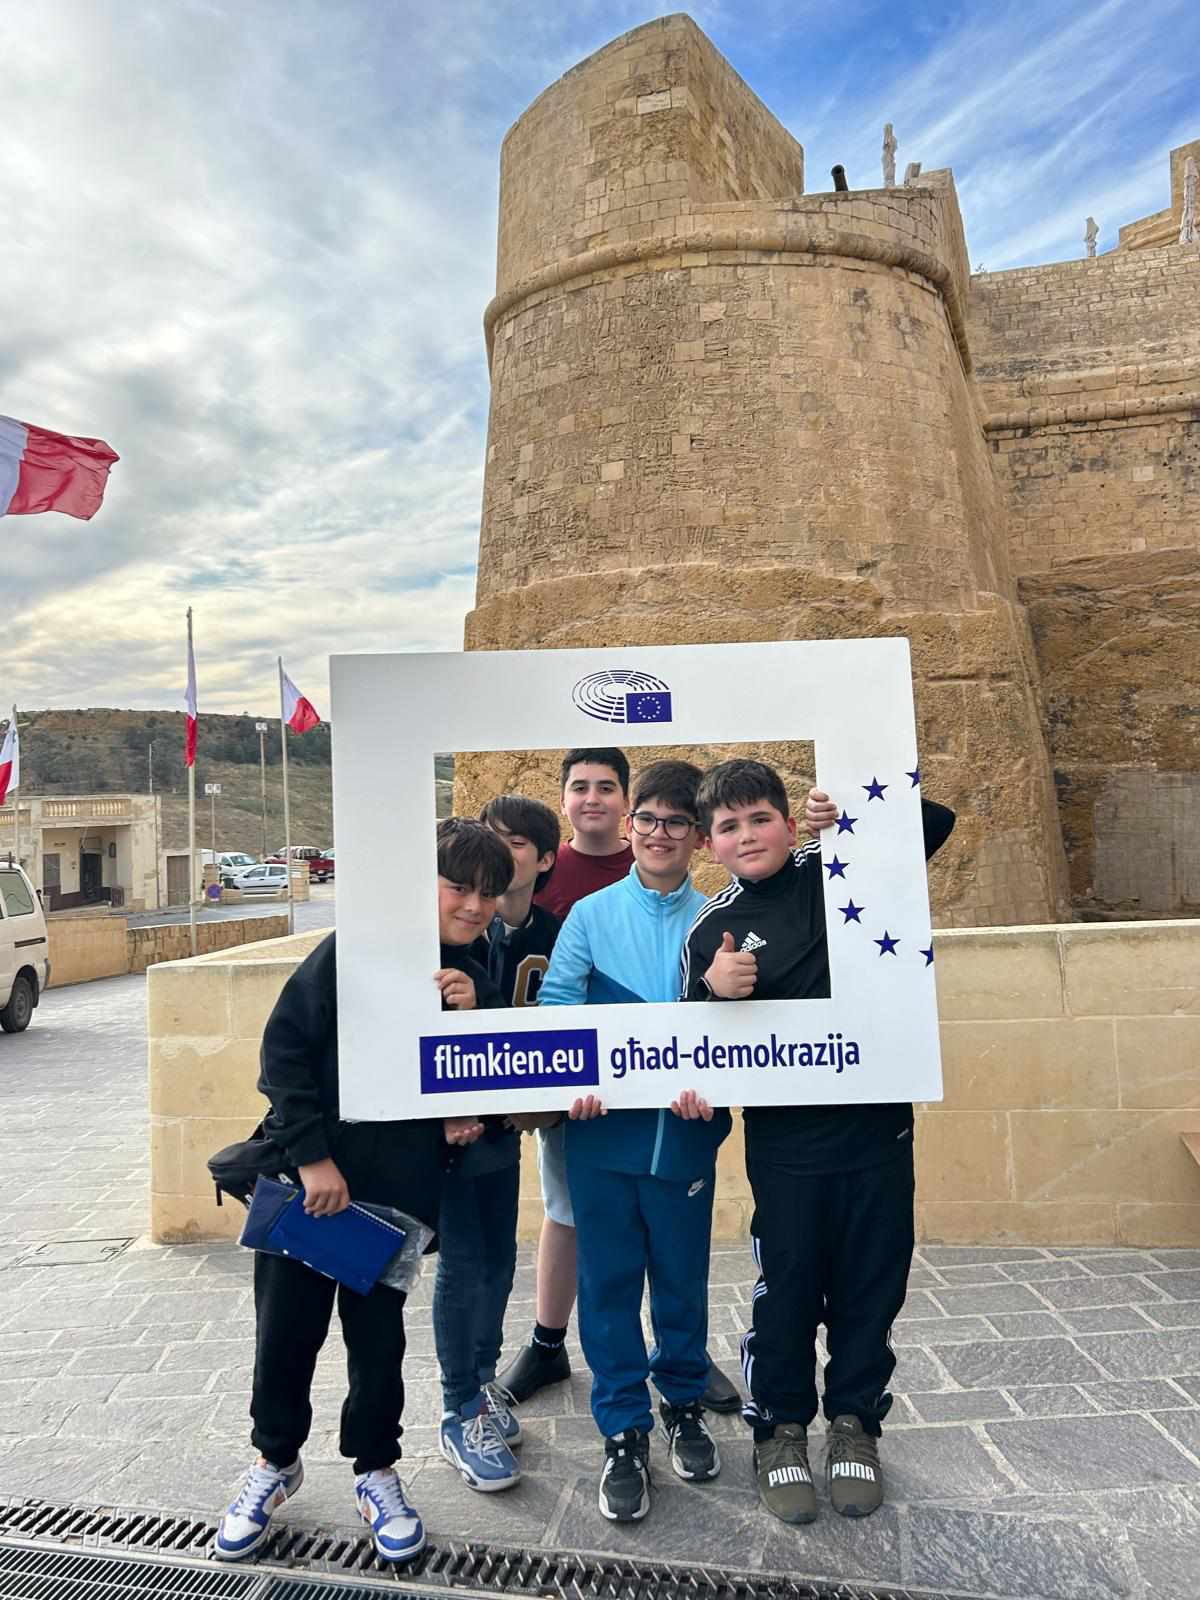 Kids with the #TogetherforDemocracy frame at the 'Lejl Imkebbes' Festival